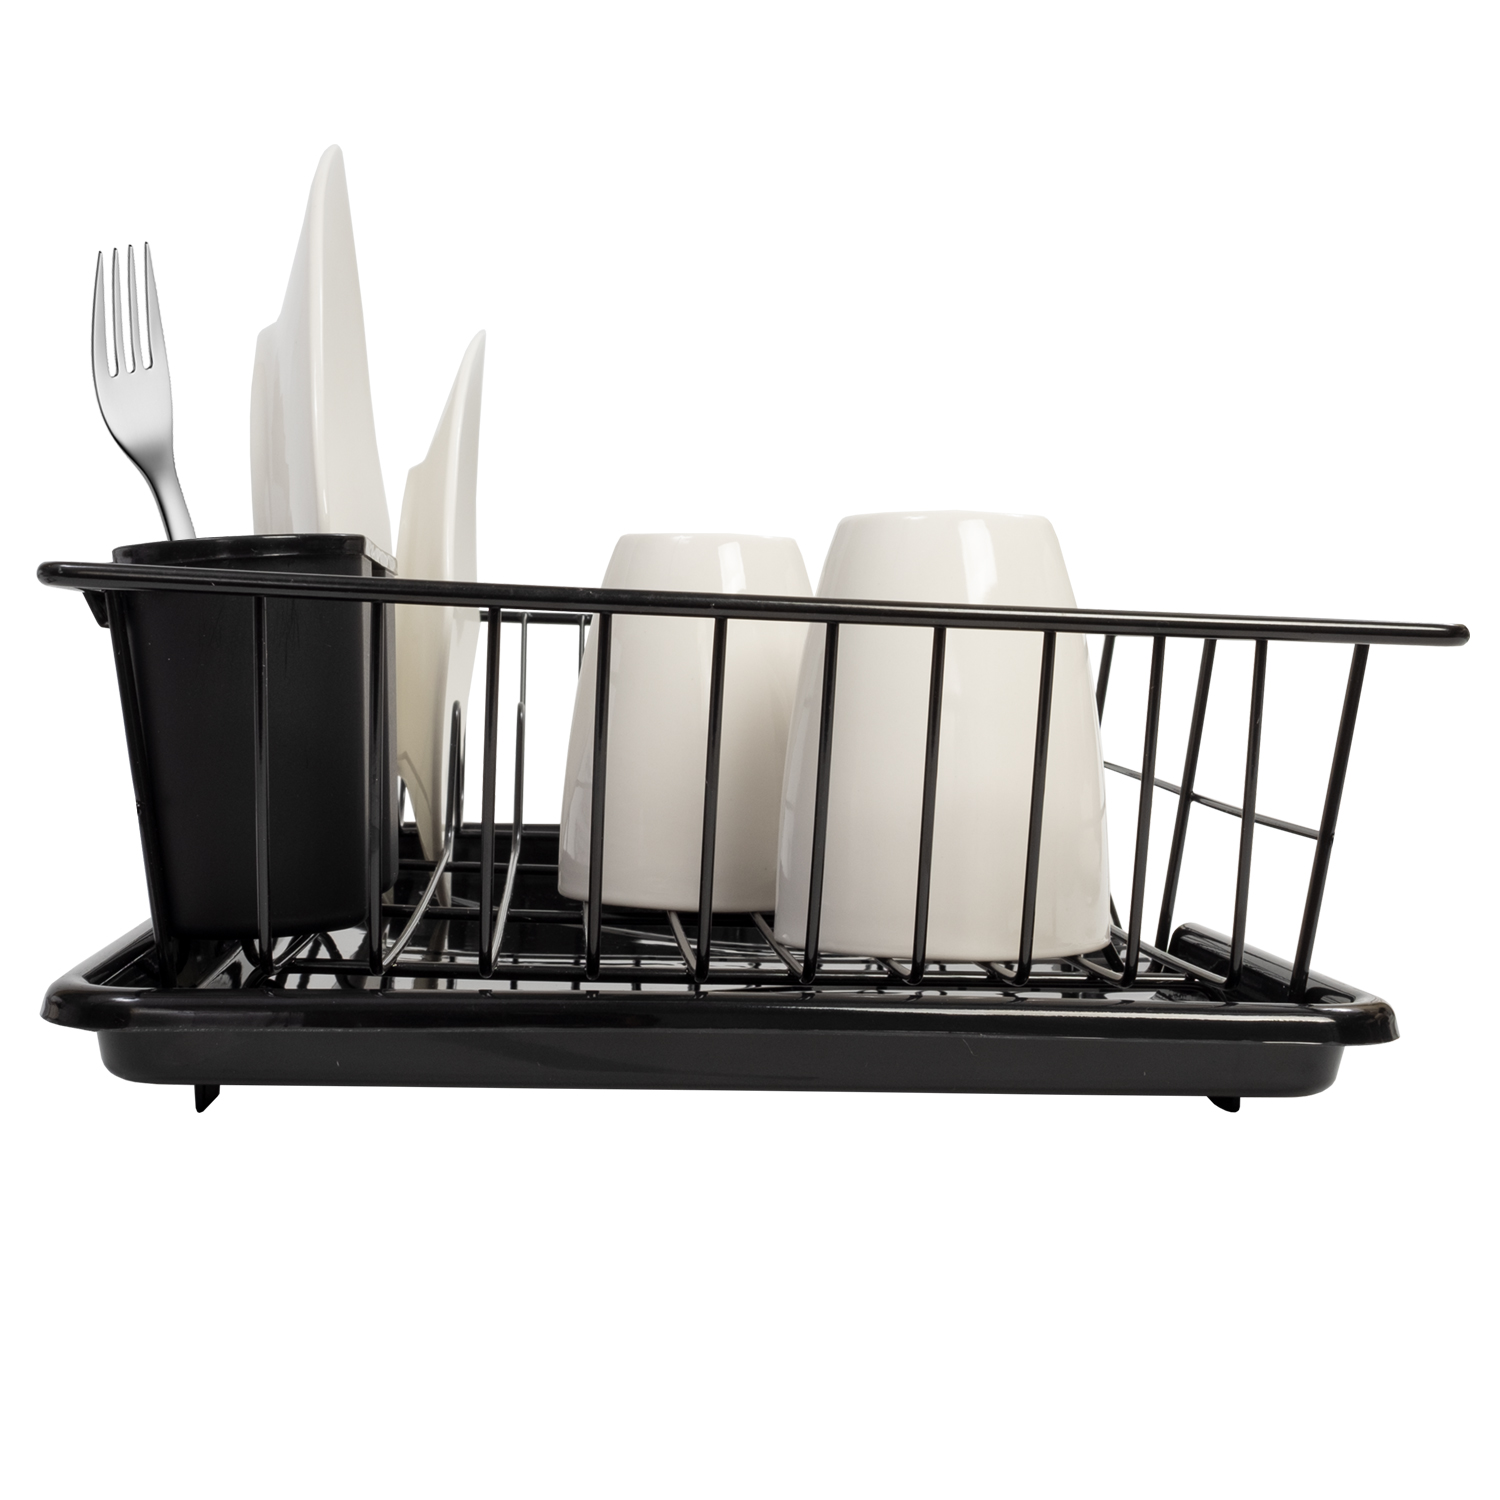 Sweet Home Collection 3-Piece Kitchen Sink Dish Drainer Set- Black - image 2 of 4